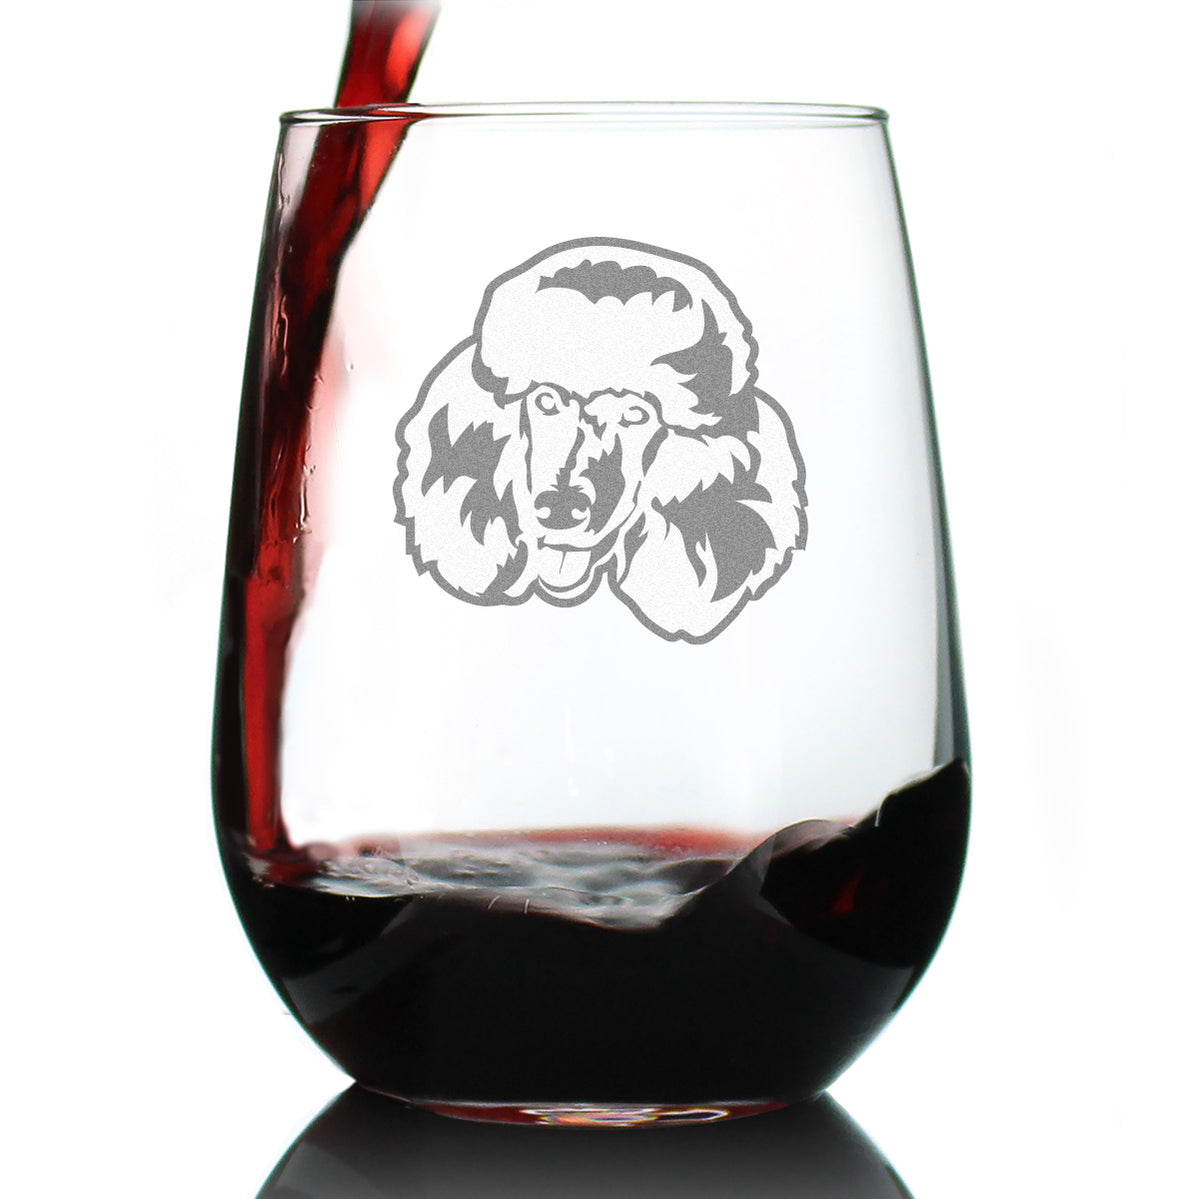 Happy Poodle - Stemless Wine Glass - Cute Poodle Themed Dog Gifts and Party Decor for Women and Men - Large Glasses